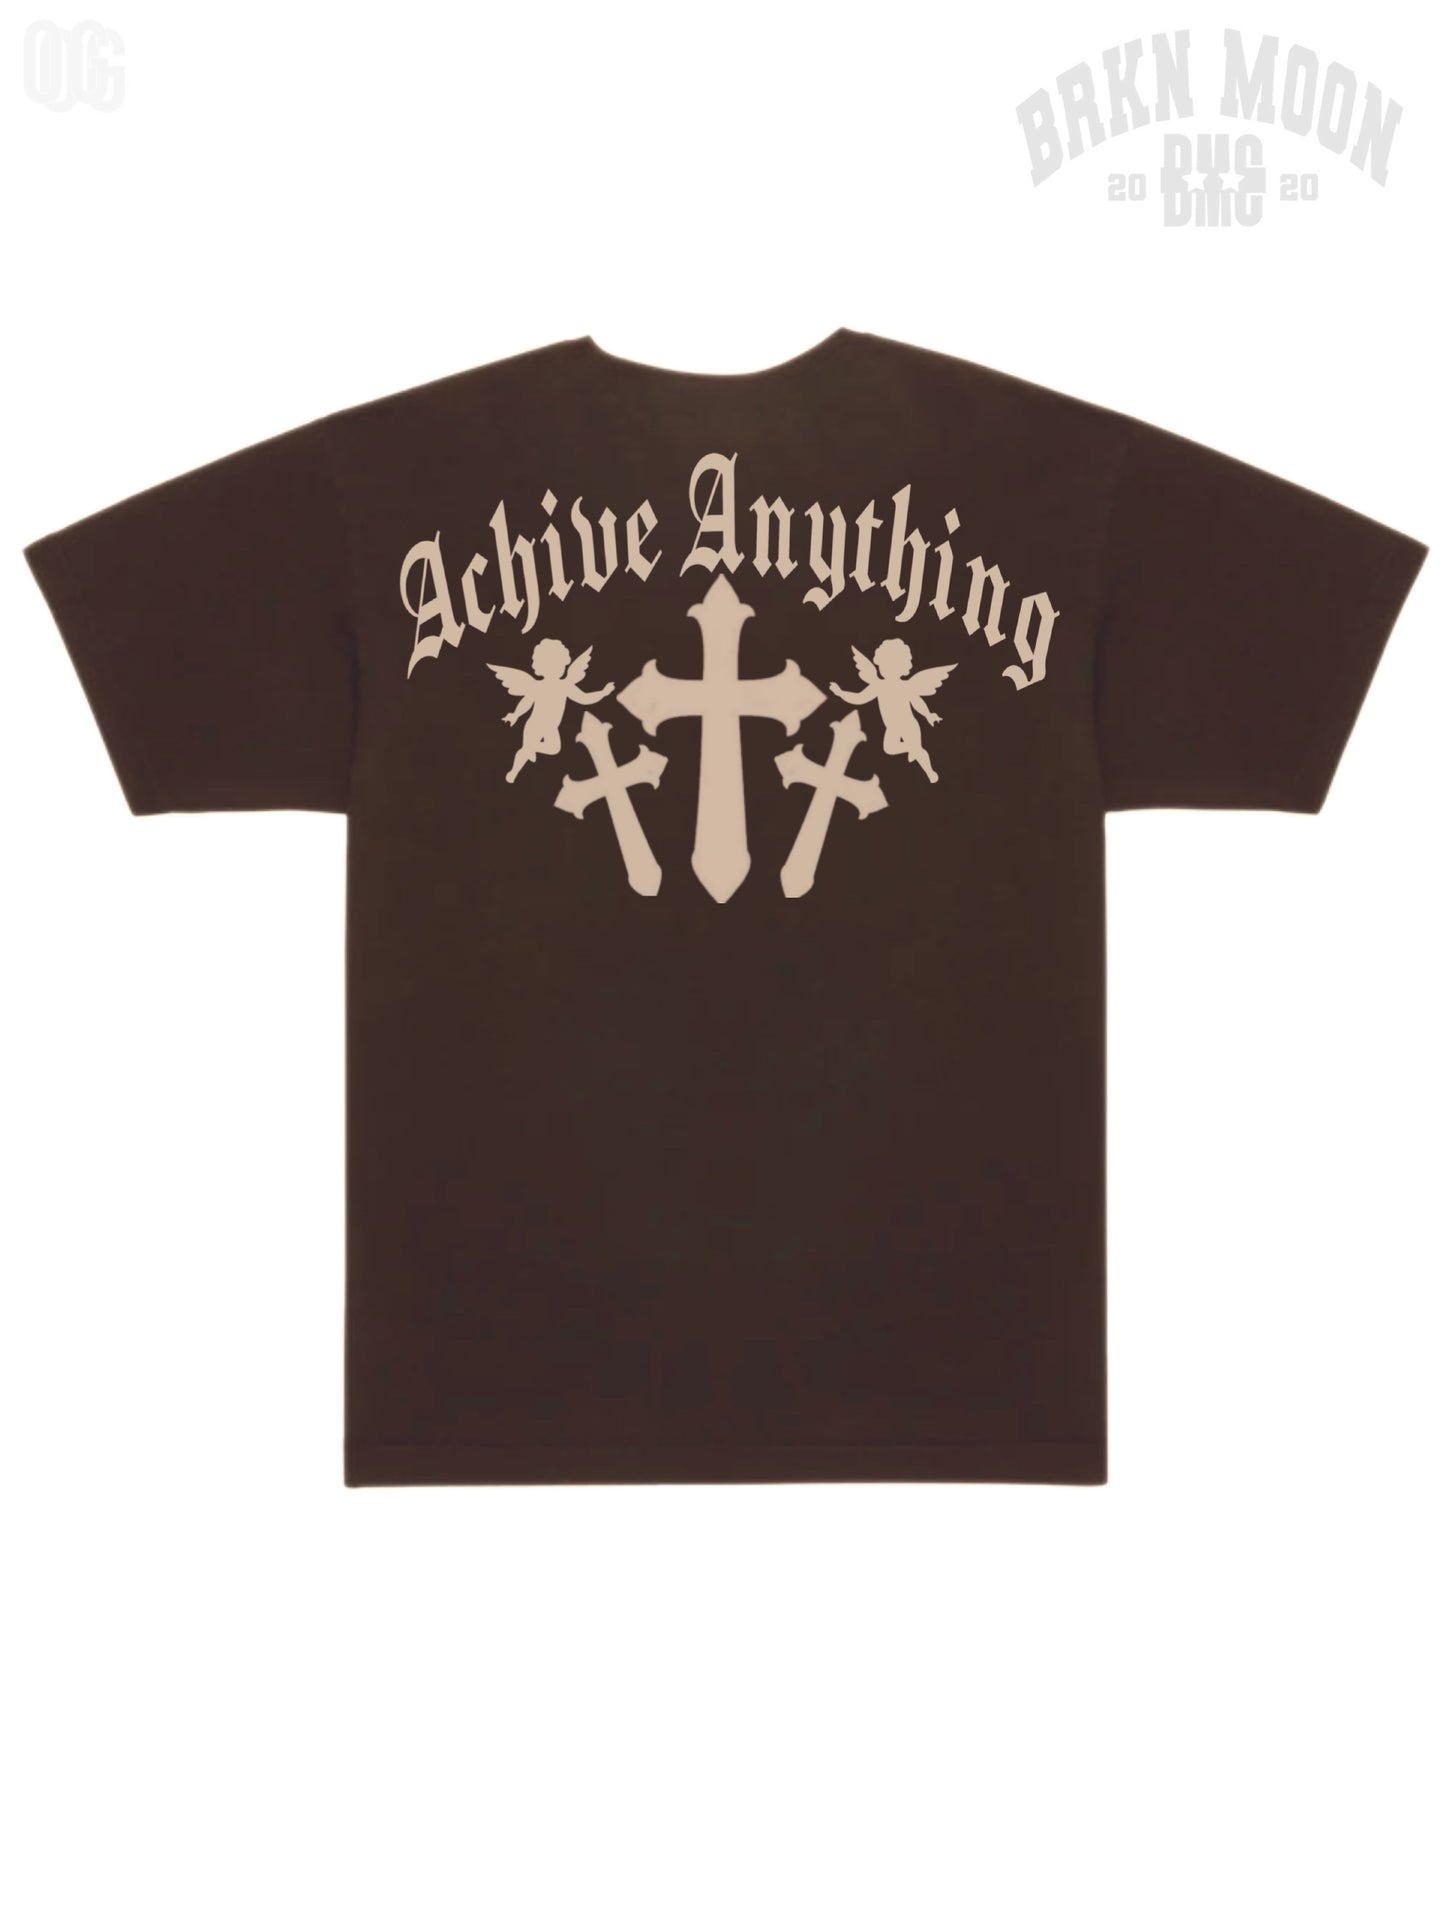 Cross And Angels T-Shirt